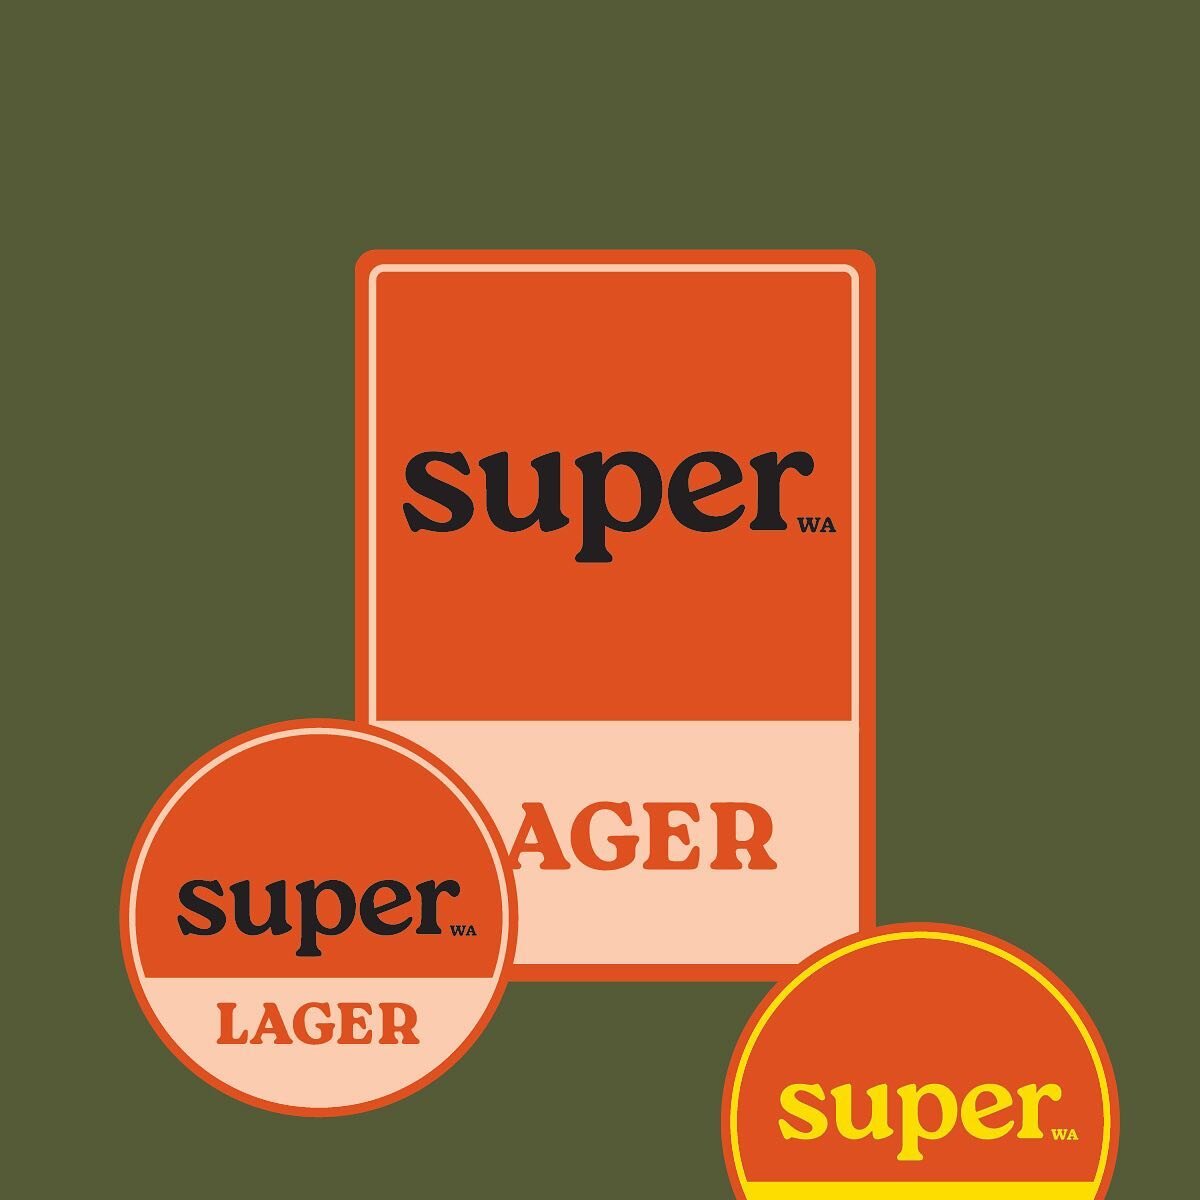 Quick brand &amp; decal update for Super beer. ⁠⁠
⁠⁠
The last tile = the start point - done by one of the founders. Only a few steps away - but now hitting the mark for immediate skew legibility. Dark bars, hectic tap designs, that name needs to be B